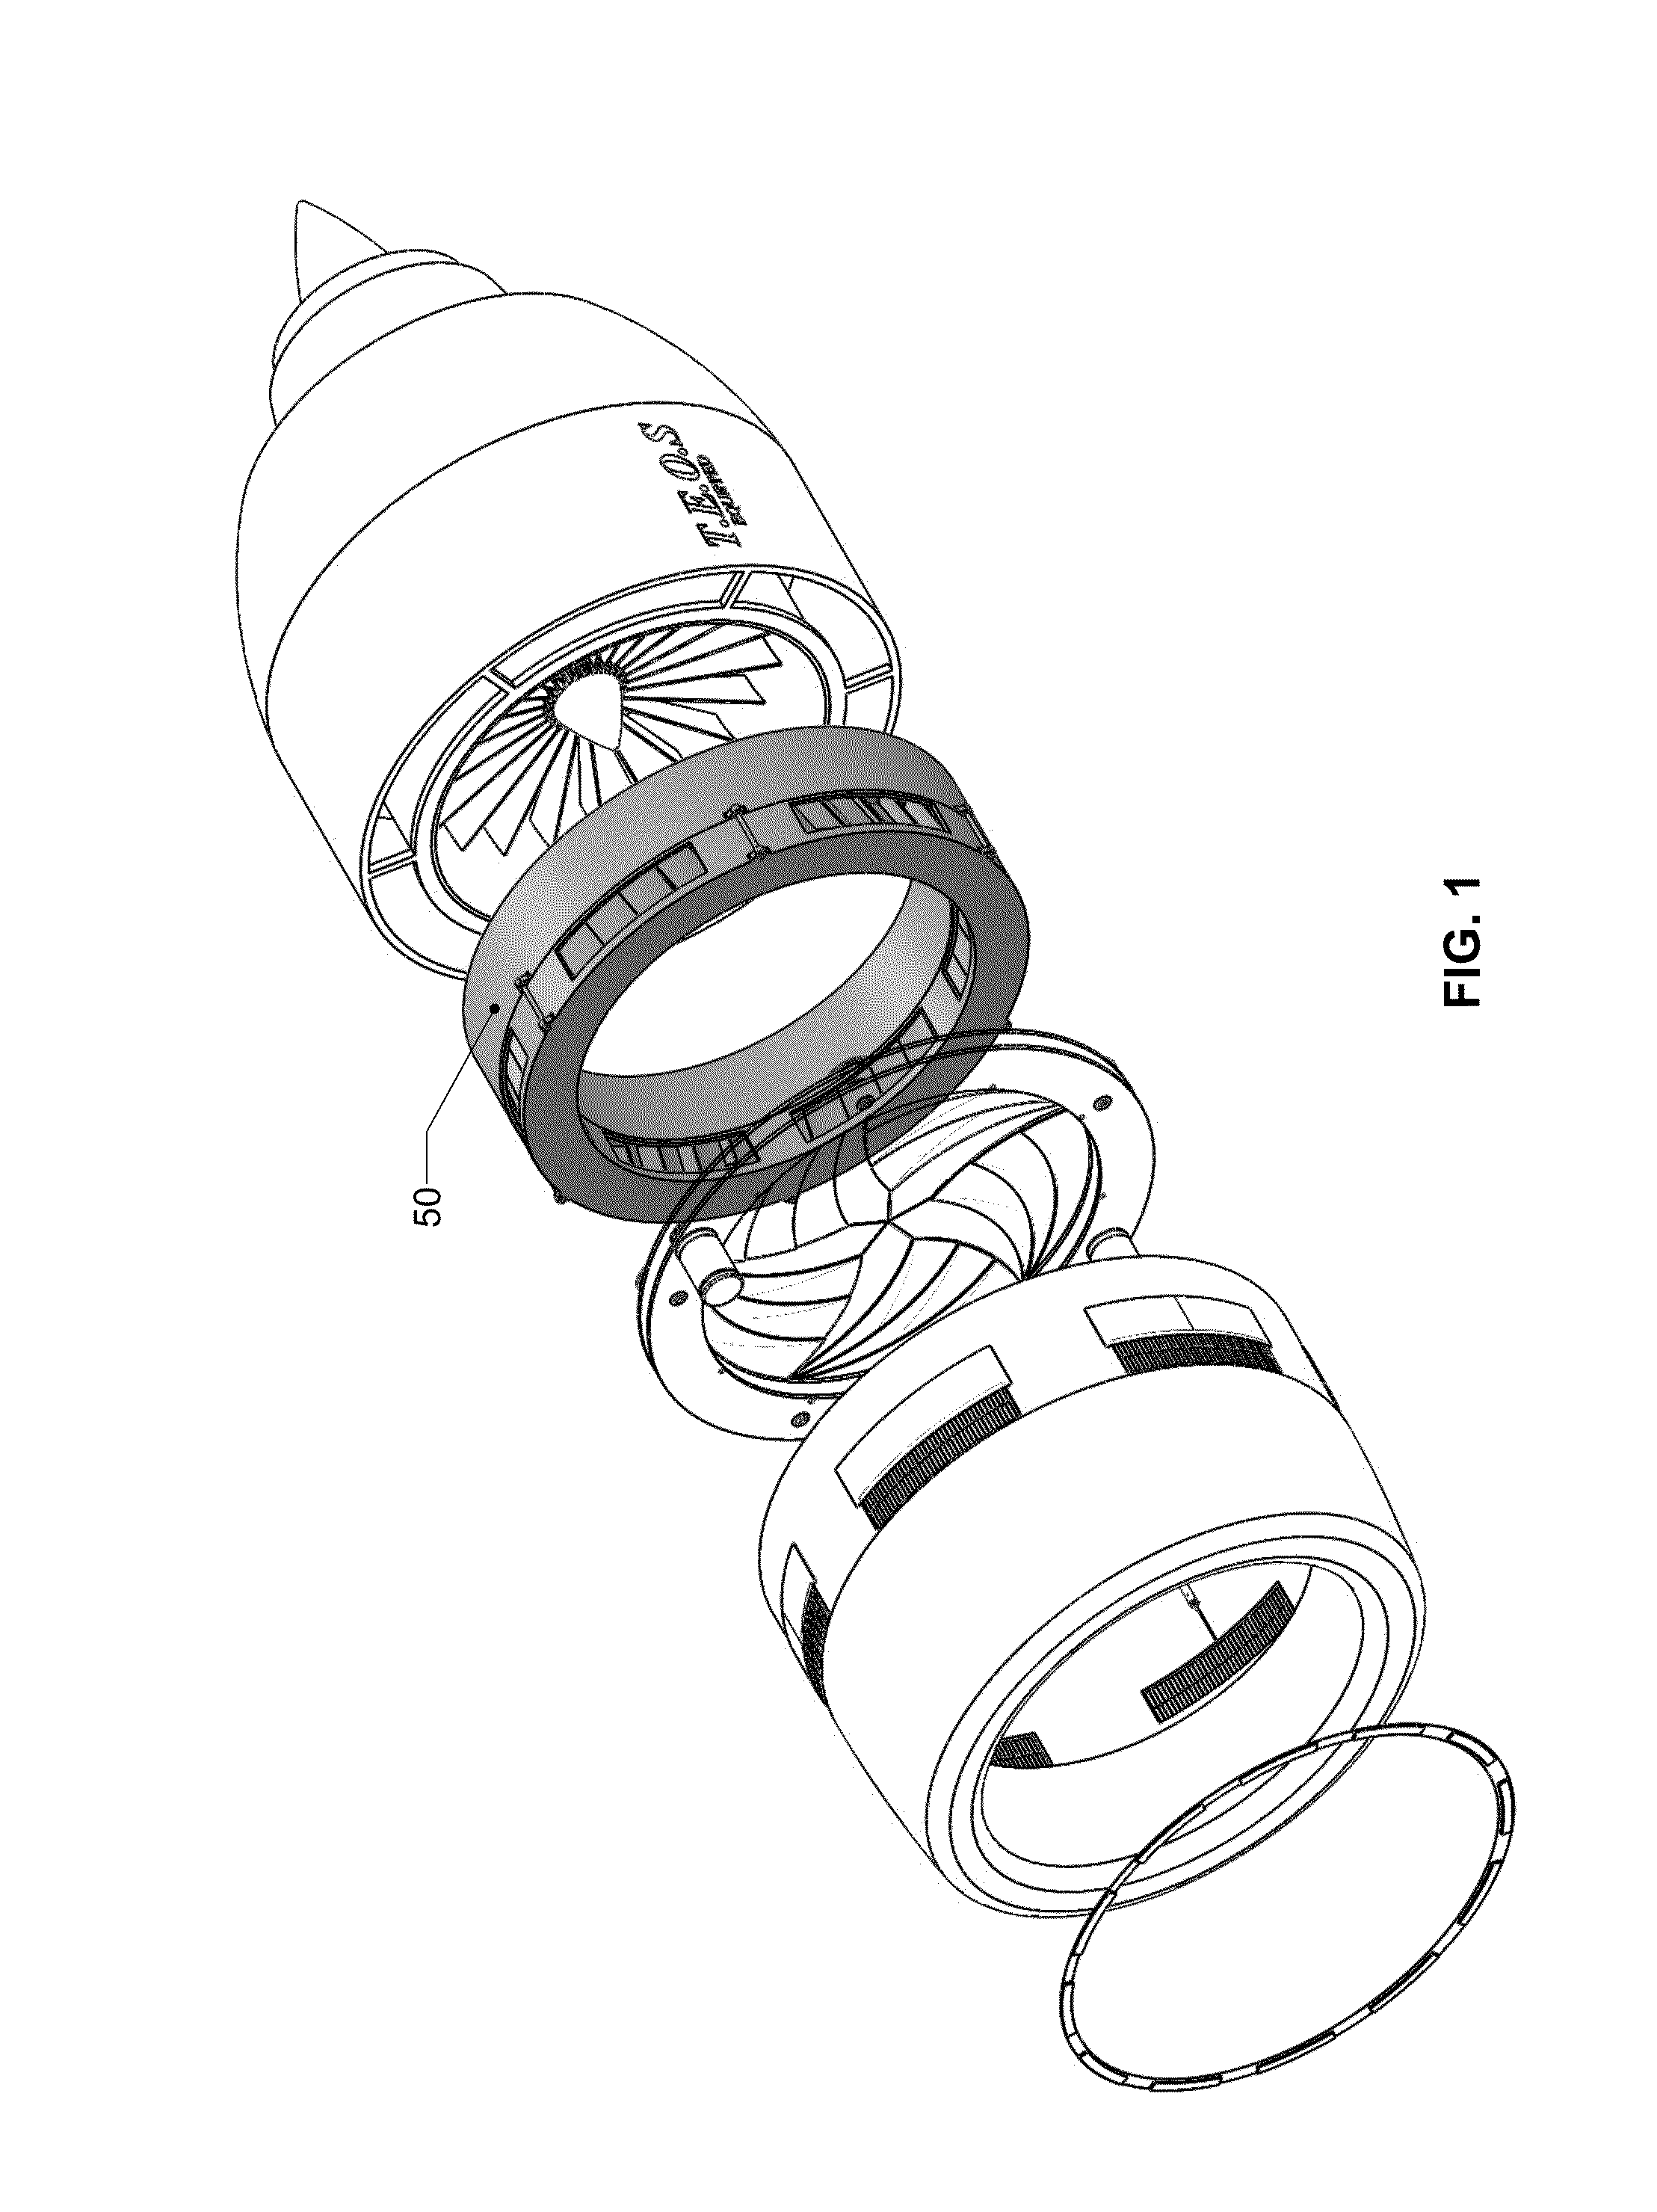 Thrust Enabling Objective System